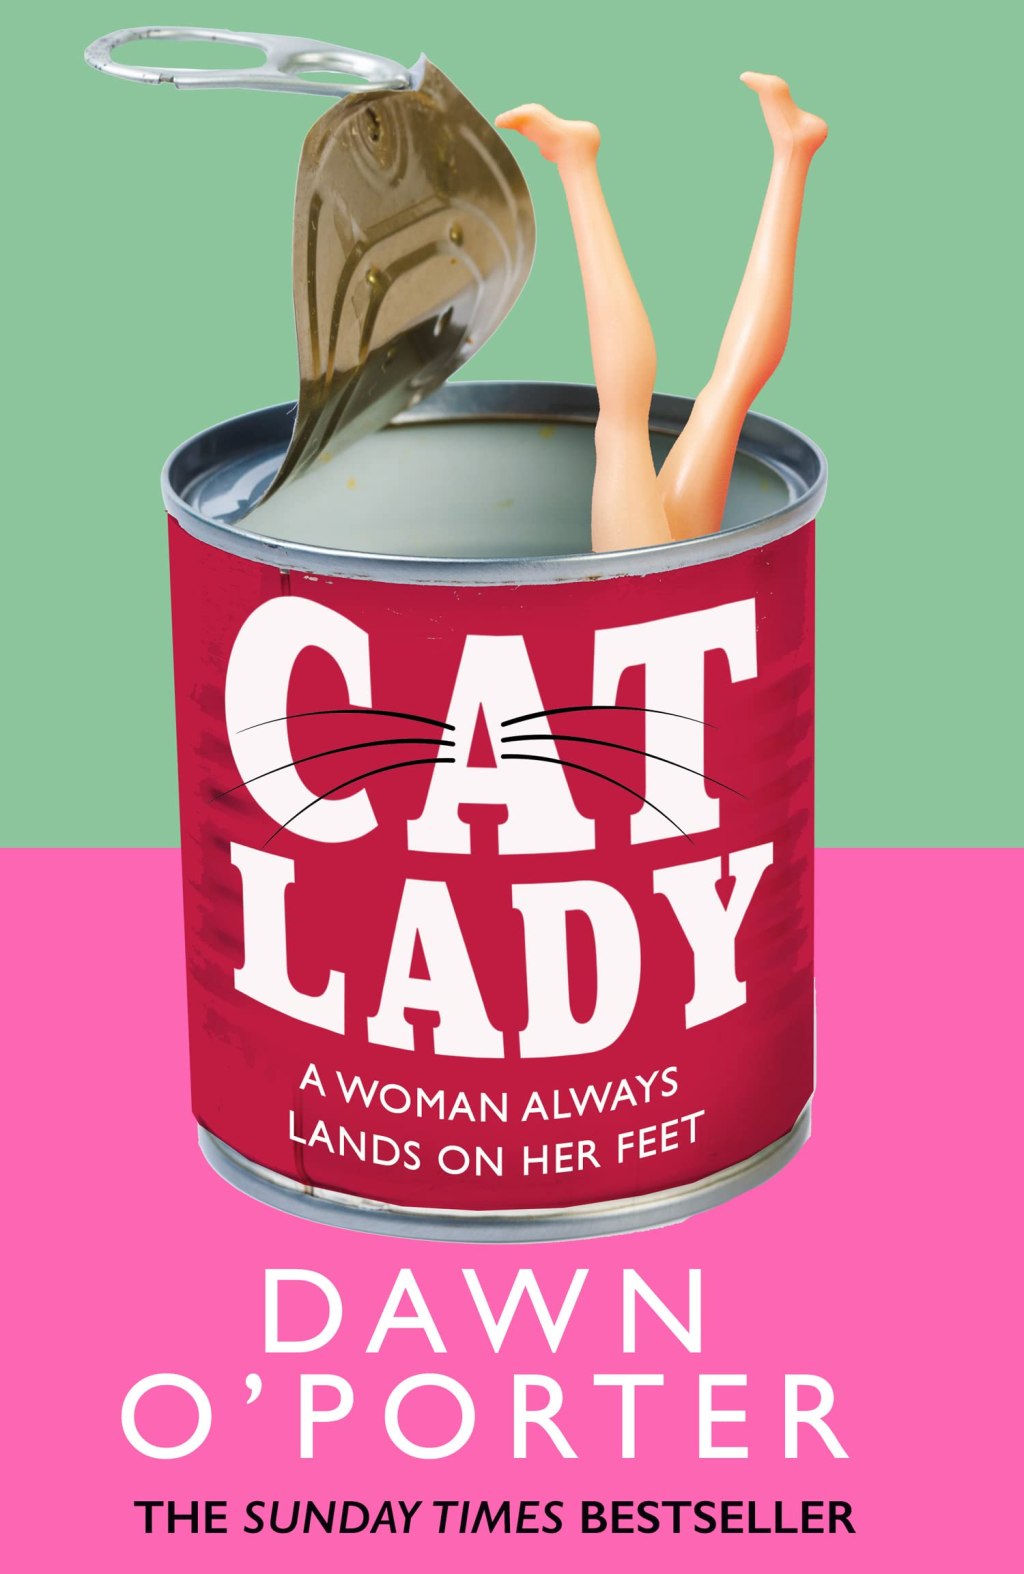 Cat Lady by Dawn O’Porter @DawnOPorter @hotpatooties @RandomTTours @HarperCollinsUK @fictionpubteam #CatLady #AD #gifted #BookTwitter